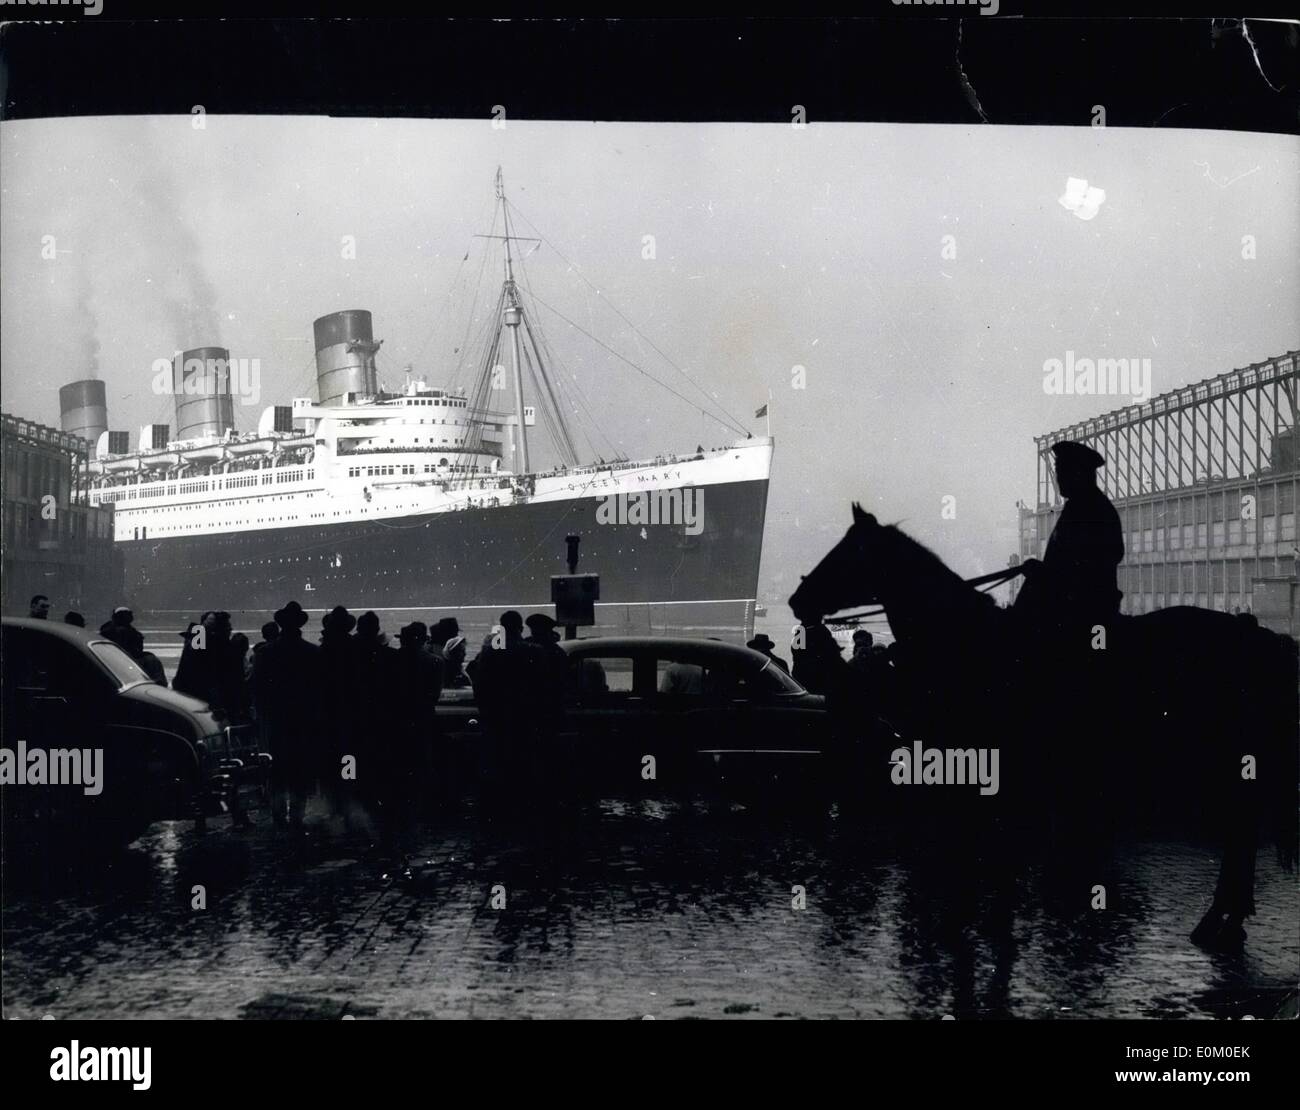 Feb. 02, 1953 - New York tug strike fails to defeat Docking of the E.S. Queen Mary: The dockside in New York was crowded by dockers - onlookers etc. to witness the amazing feat of the docking of s.s. Queen Mary - a feat which she managed without the aid of the usual 20 tugs pushing and pulling her alongside the pier. Even the striking tug crews had to admit that ''It took plenty to beat these Britshers''. At the first attempt the fast flowing tide put the giant liner in an unfavorable position just as she had her bows in the dock entrance, and the skipper quickly put her estern Stock Photo